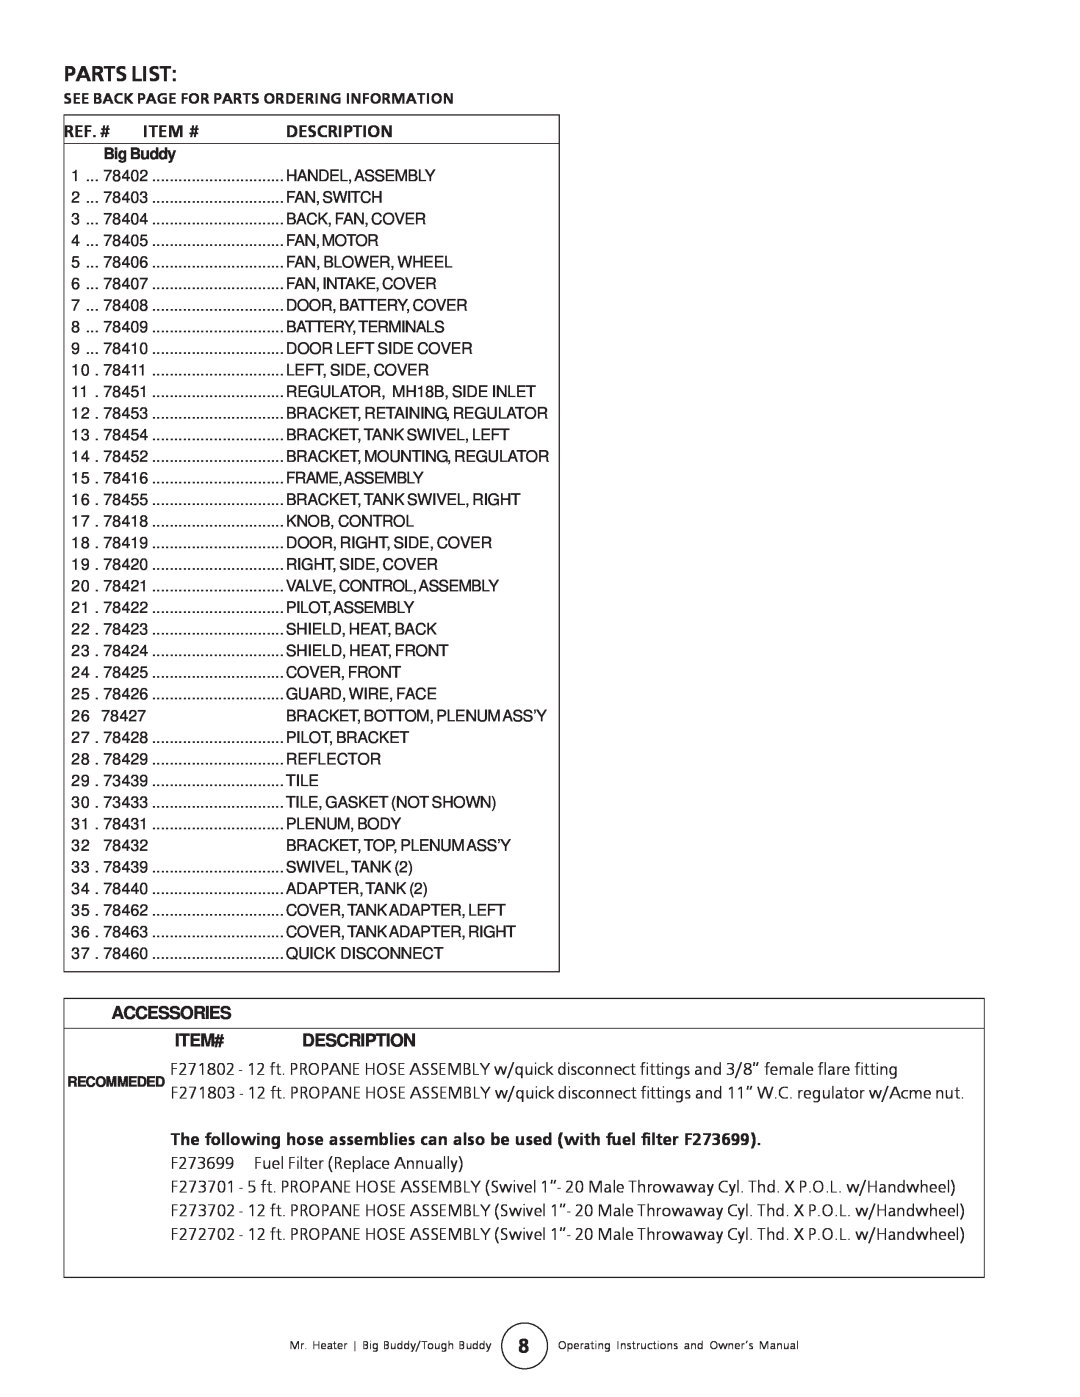 Enerco MH18B Parts List, See Back Page For Parts Ordering Information, Ref. #, Big Buddy, Accessories 